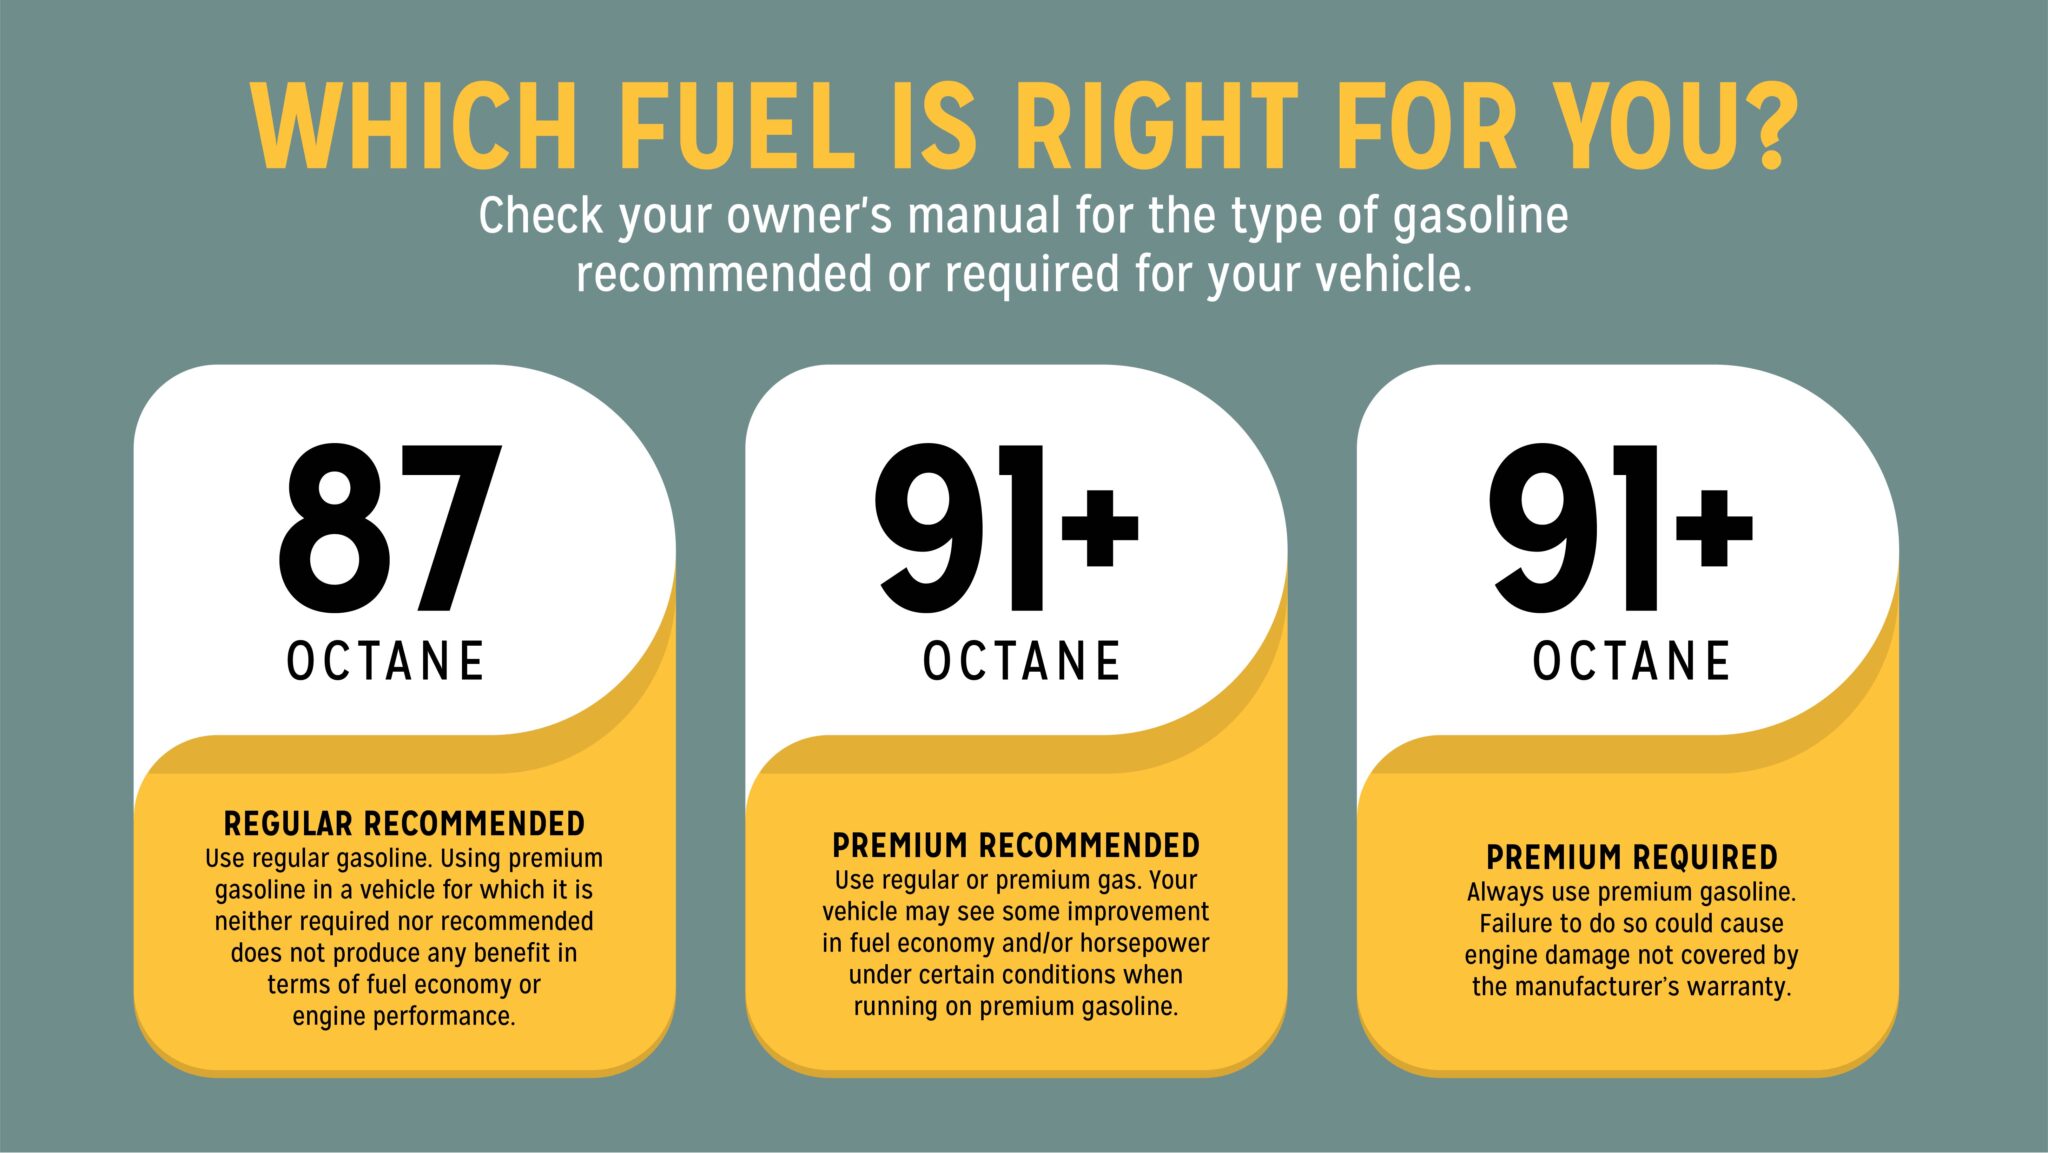 Which fuel is right for you infographic